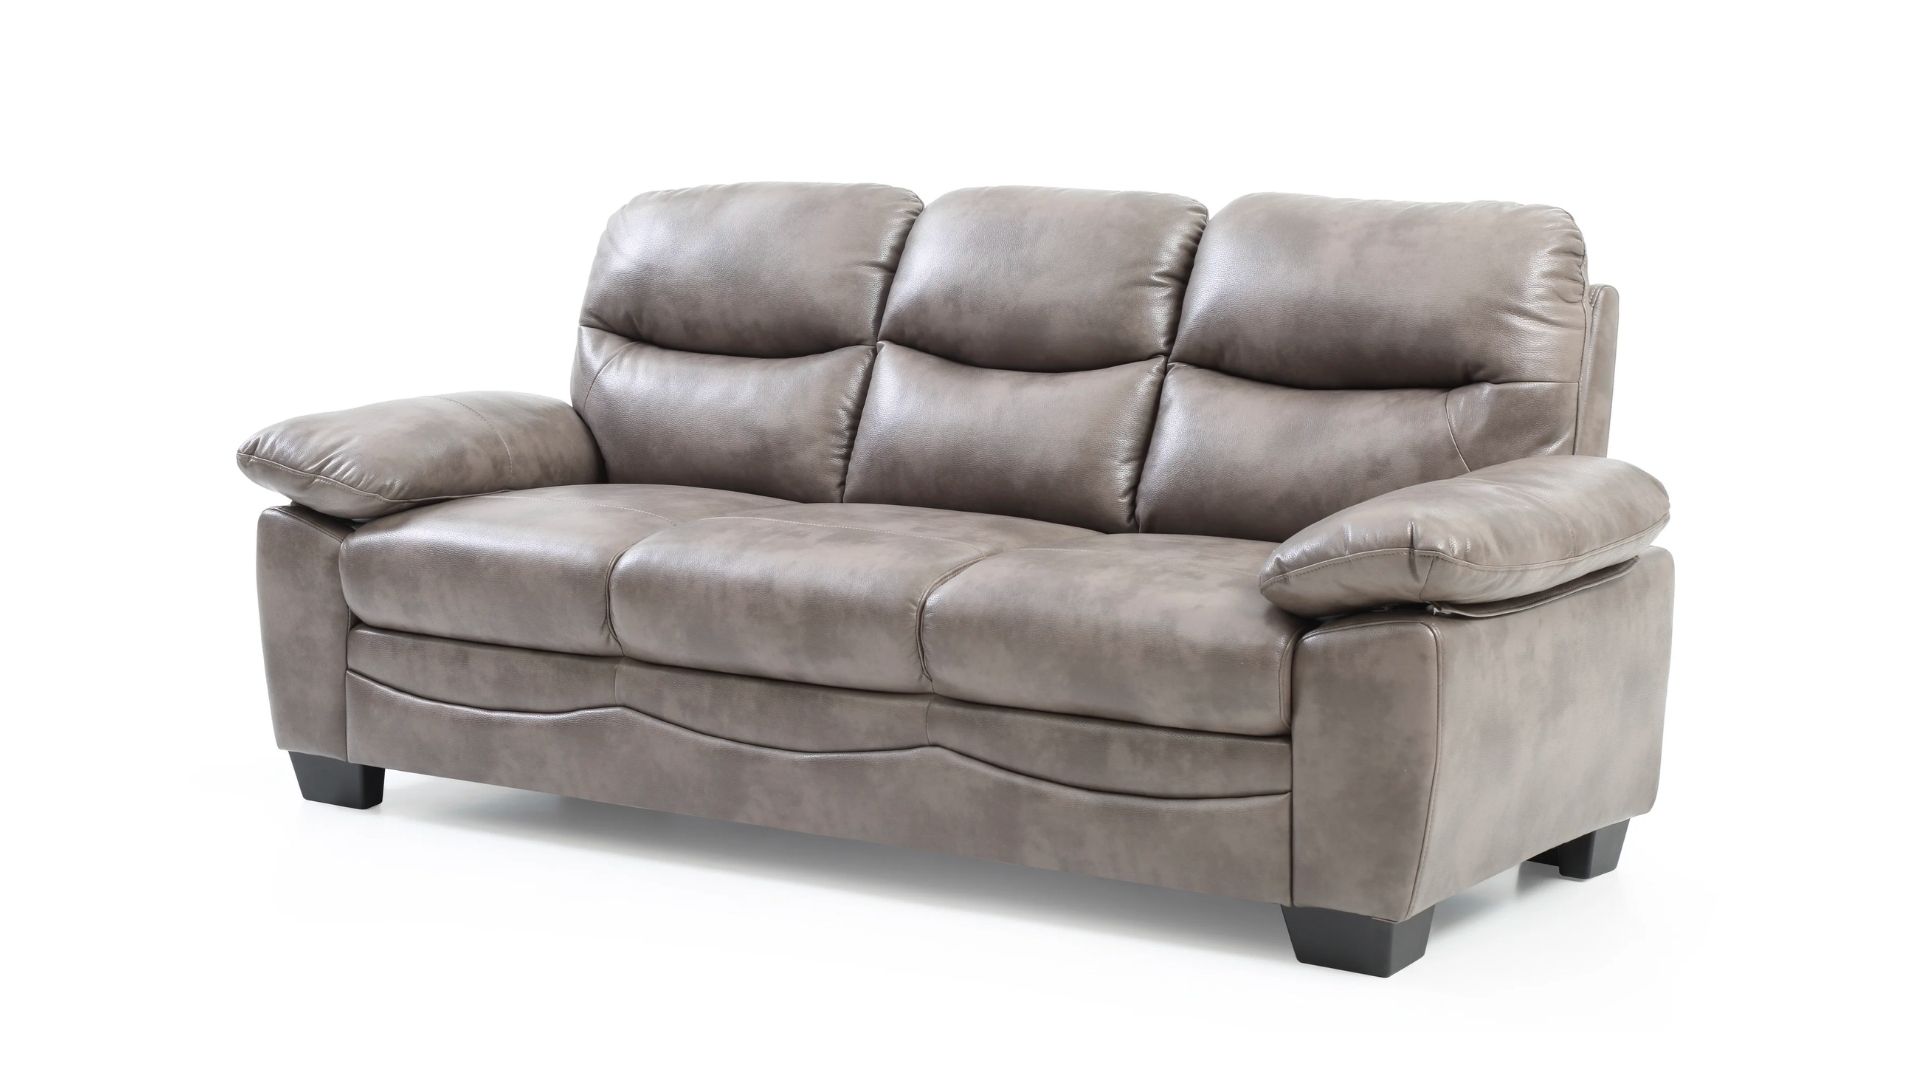 Best Faux Leather Couches and sofas